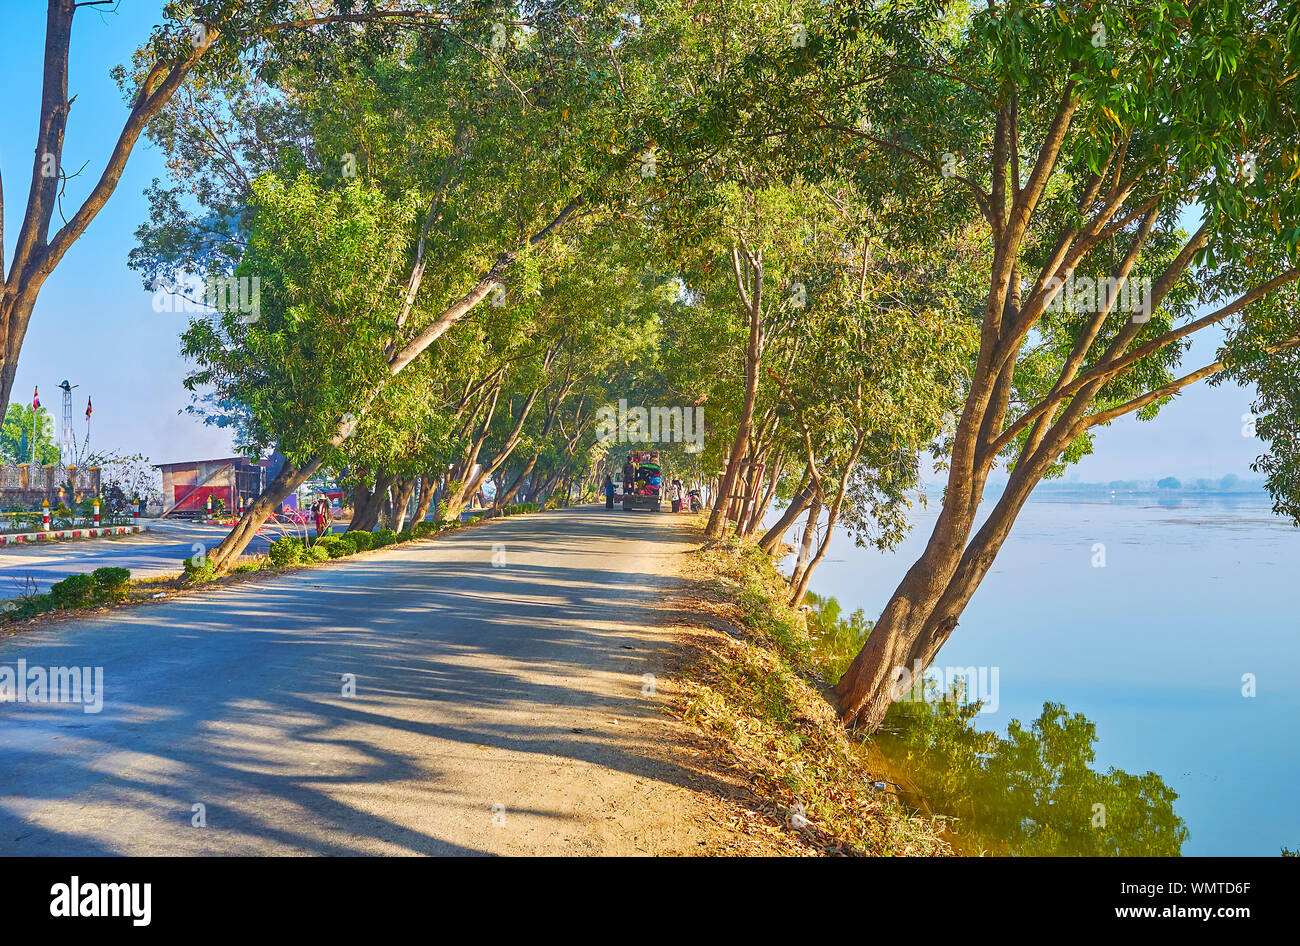 The shady road at Tharzi pond with lush thickets of trees, cars stop to make donations to workers of local Buddhist temple, Nyaungshwe, Myanmar Stock Photo